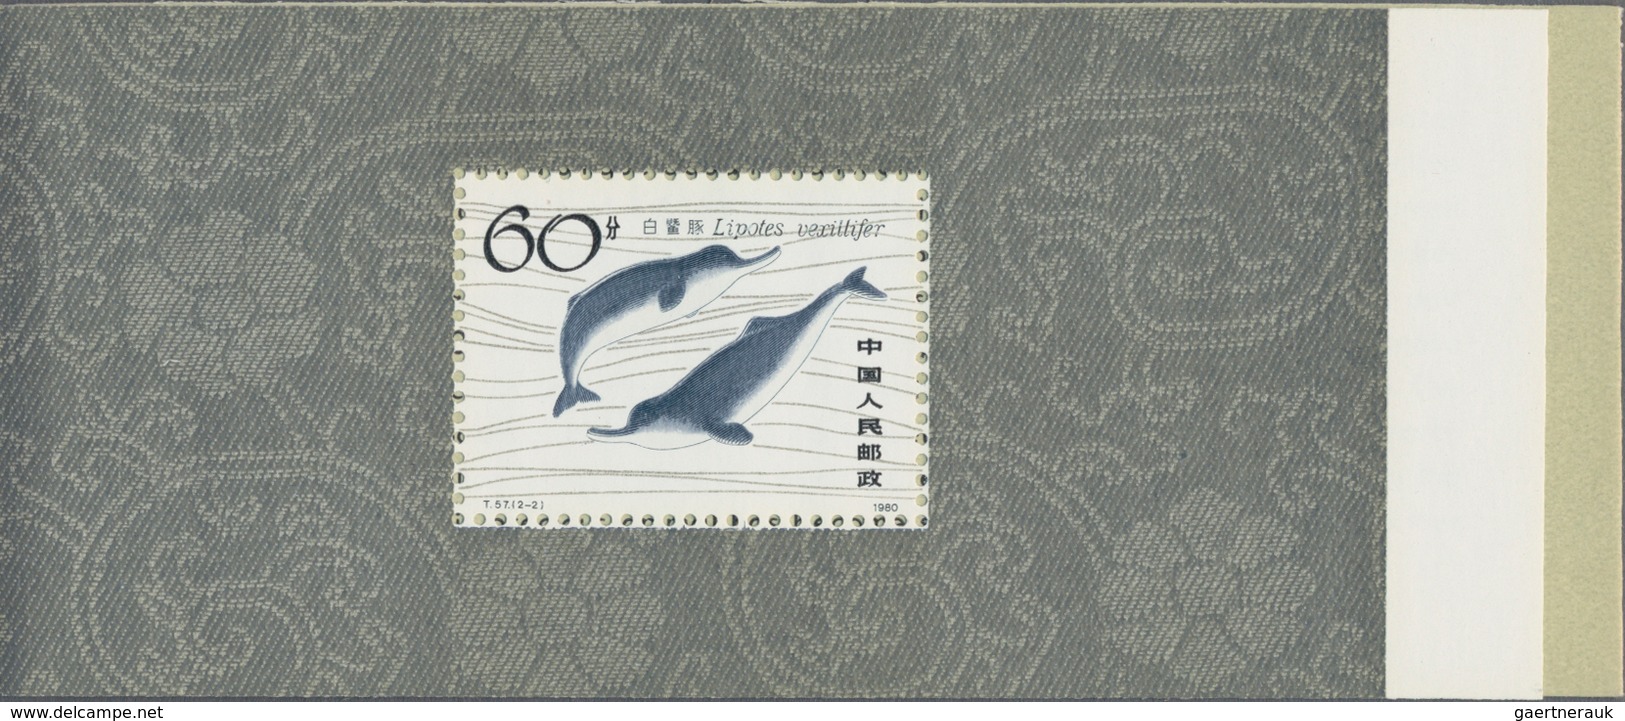 China - Volksrepublik: 1981, 4 SB2 Chinese River Dolphins Booklet Panes (Michel €440). - Lettres & Documents